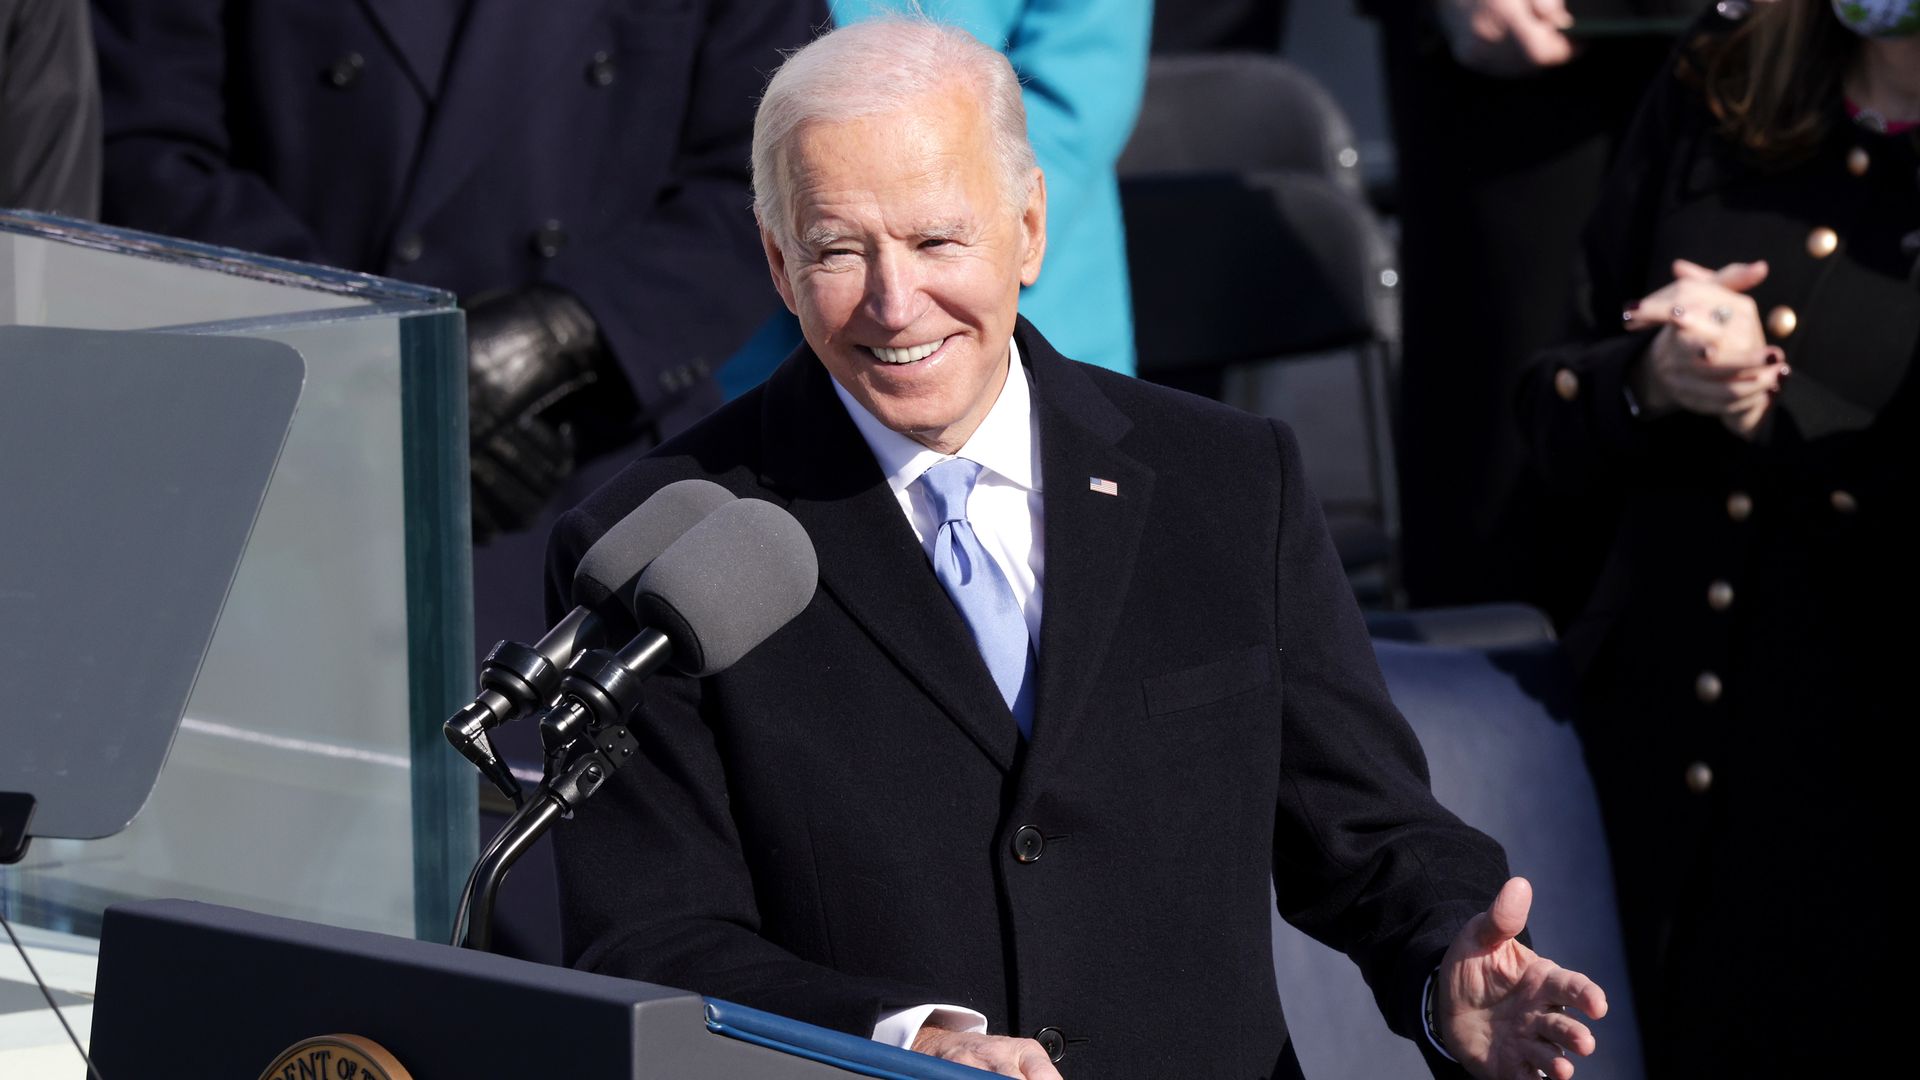 President Joe Biden reacts as he delivers his inaugural address on the West Front of the U.S. Capitol on January 20